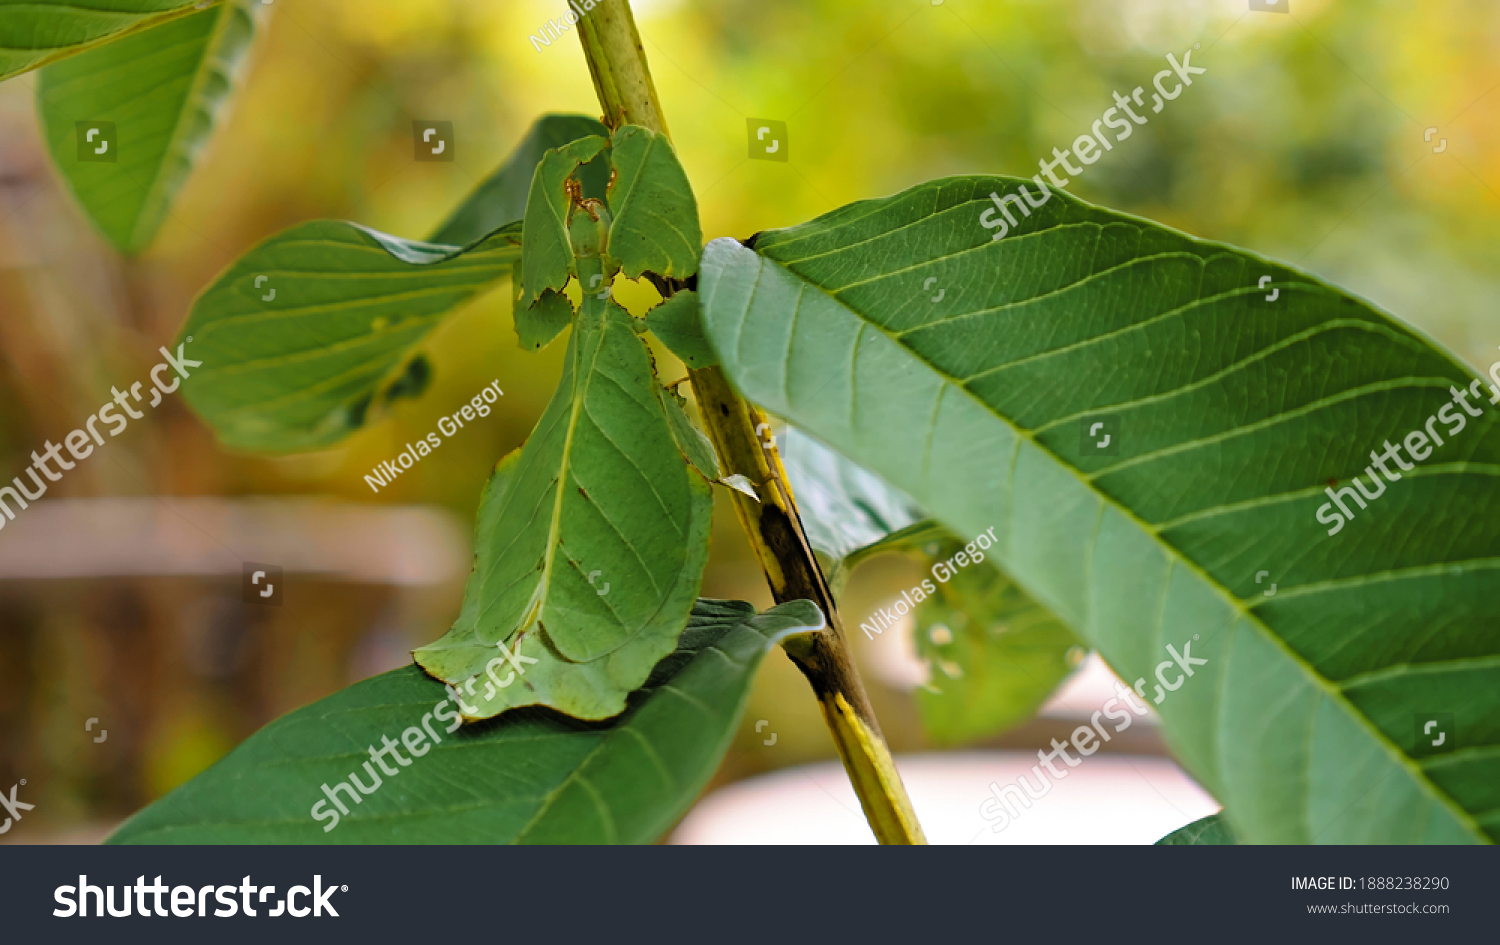 Leaf Insect the green Phylliidae sticking under a leaf and well camouflaged and themes towards the stem on a tropical forest #1888238290